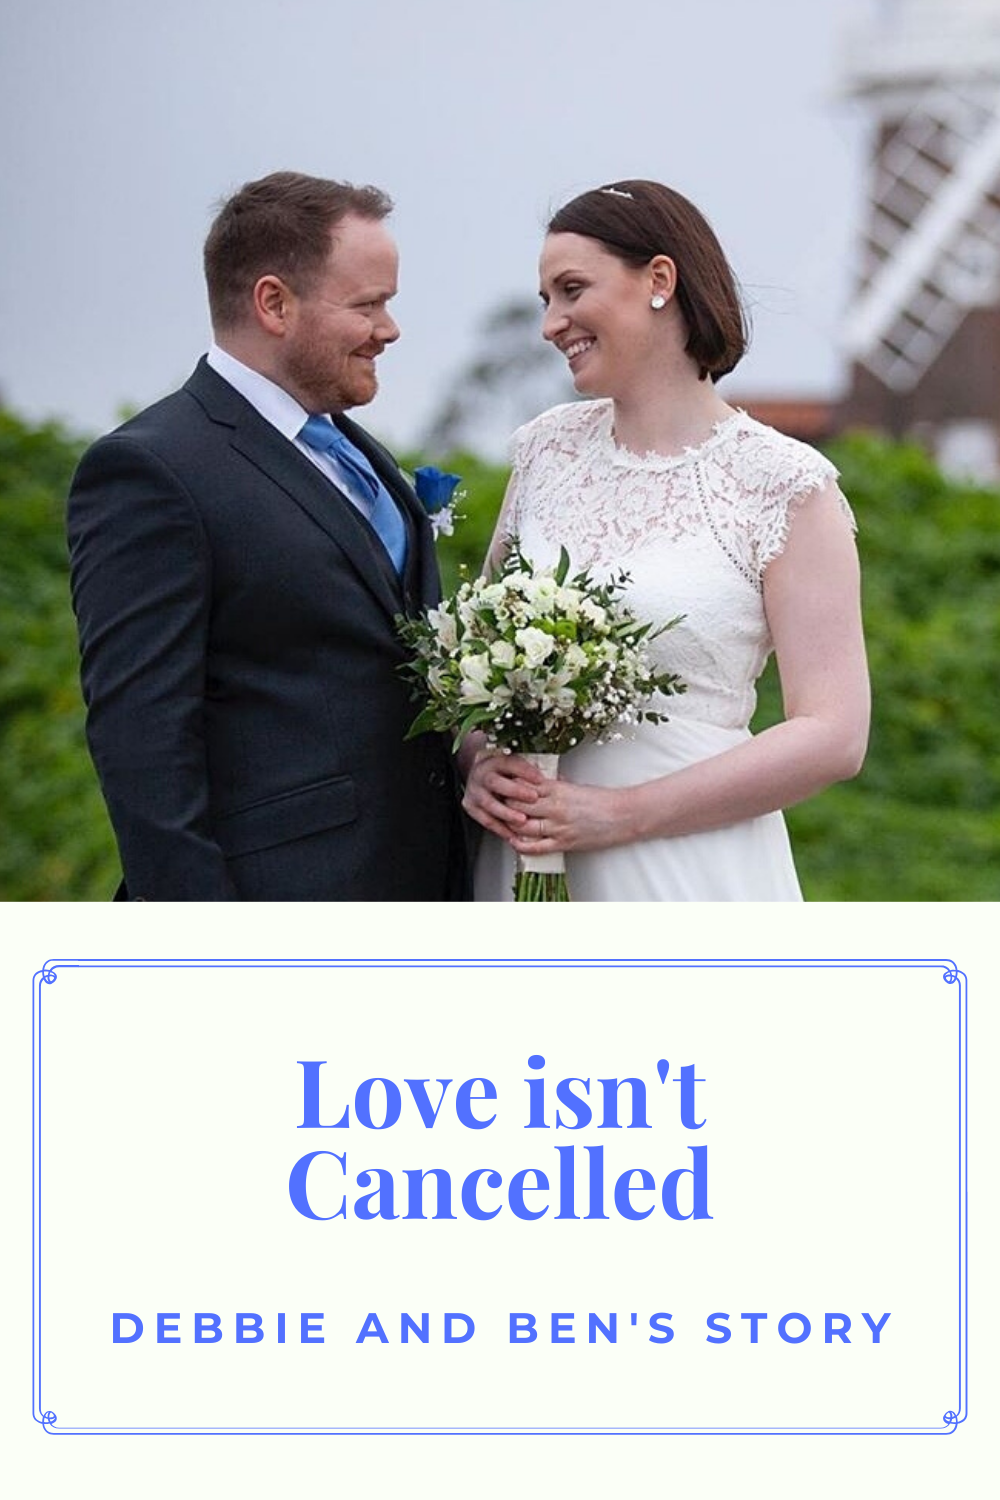 Love isn’t cancelled – Debbie and Ben’s Story